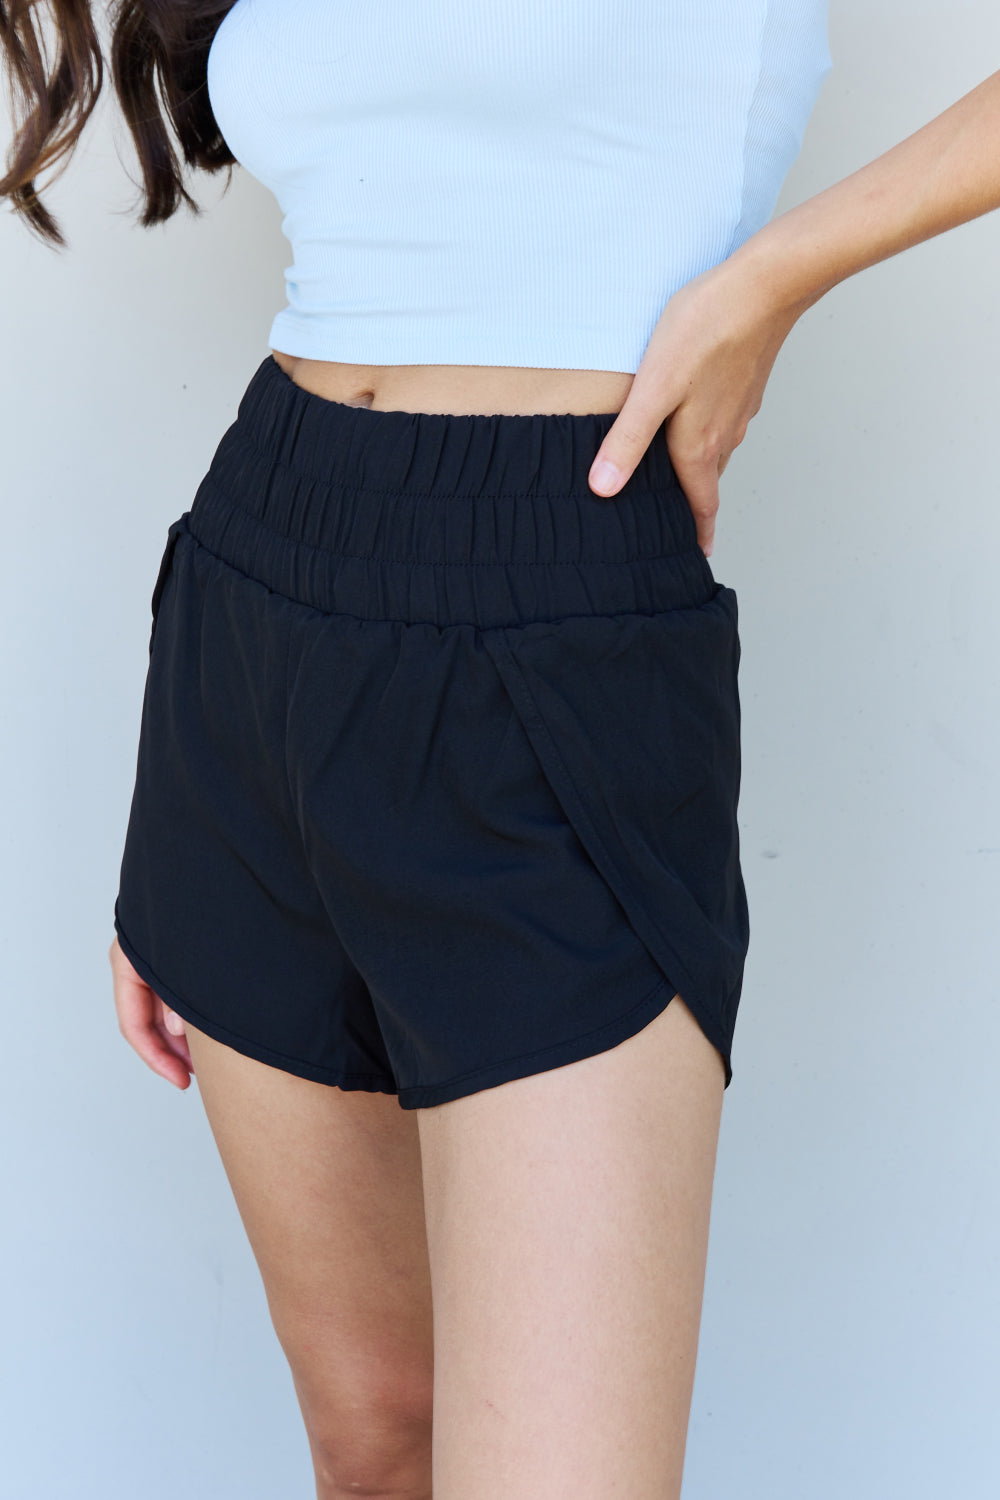 Stay Active High Waistband Athletic Shorts - Black